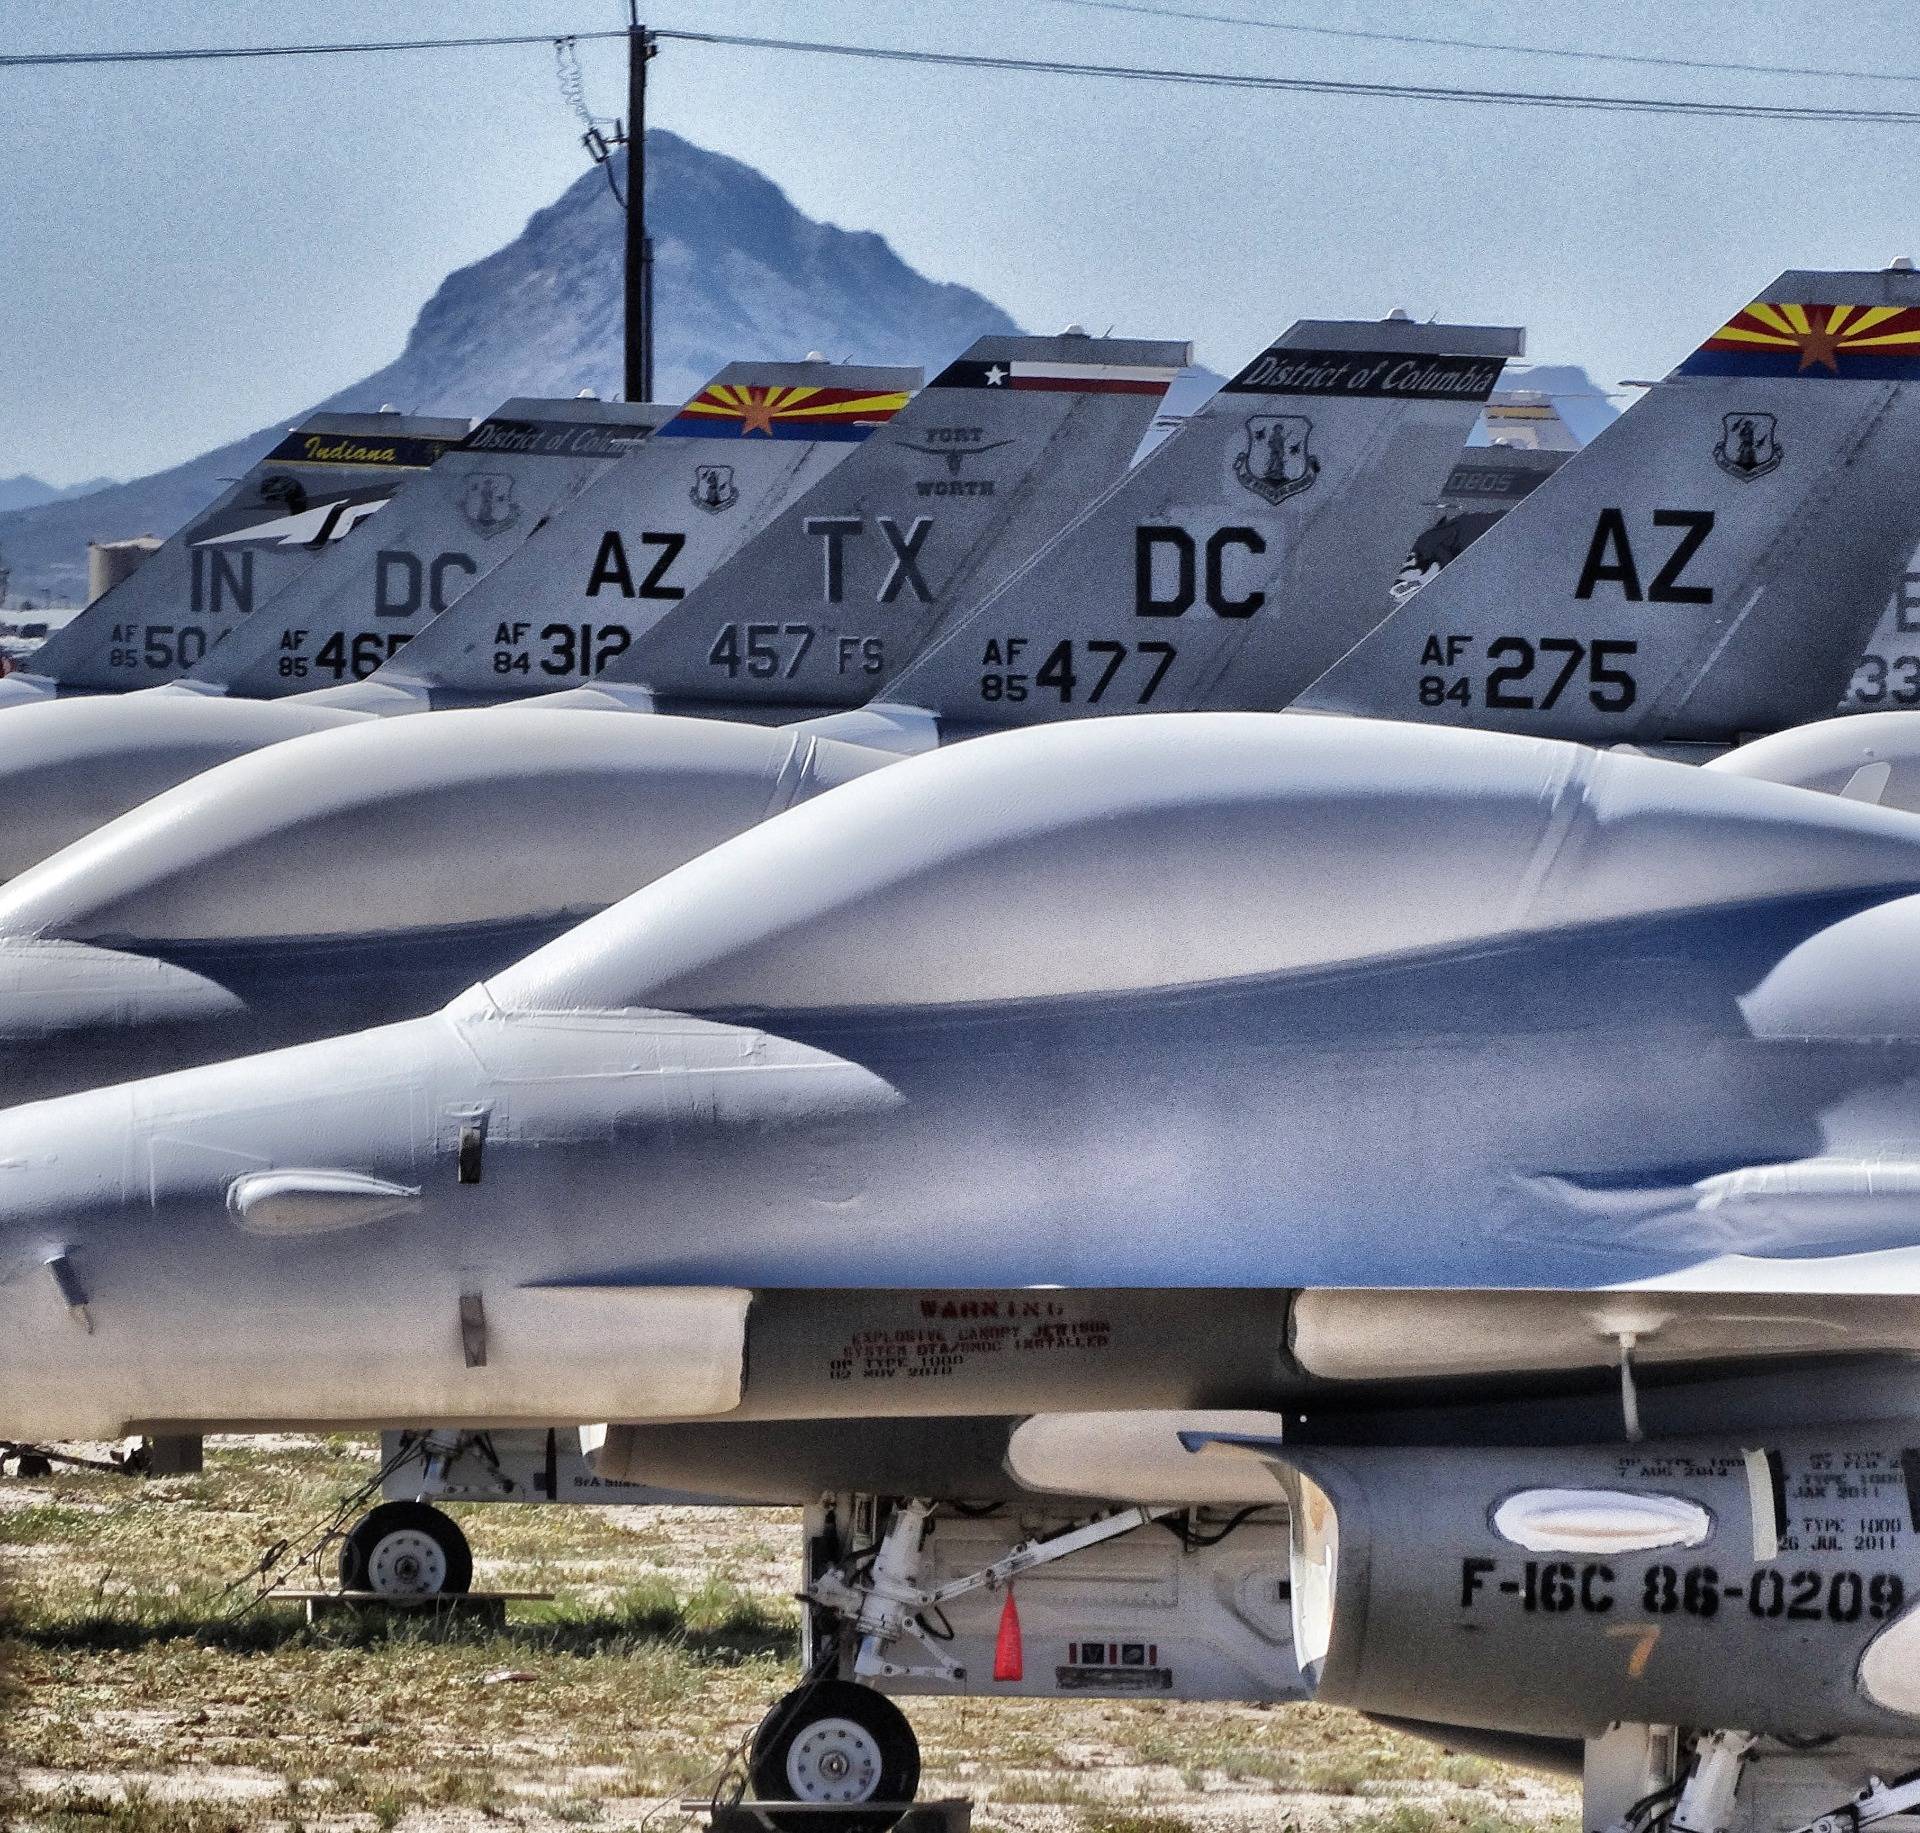 Air fighters of the national guard.